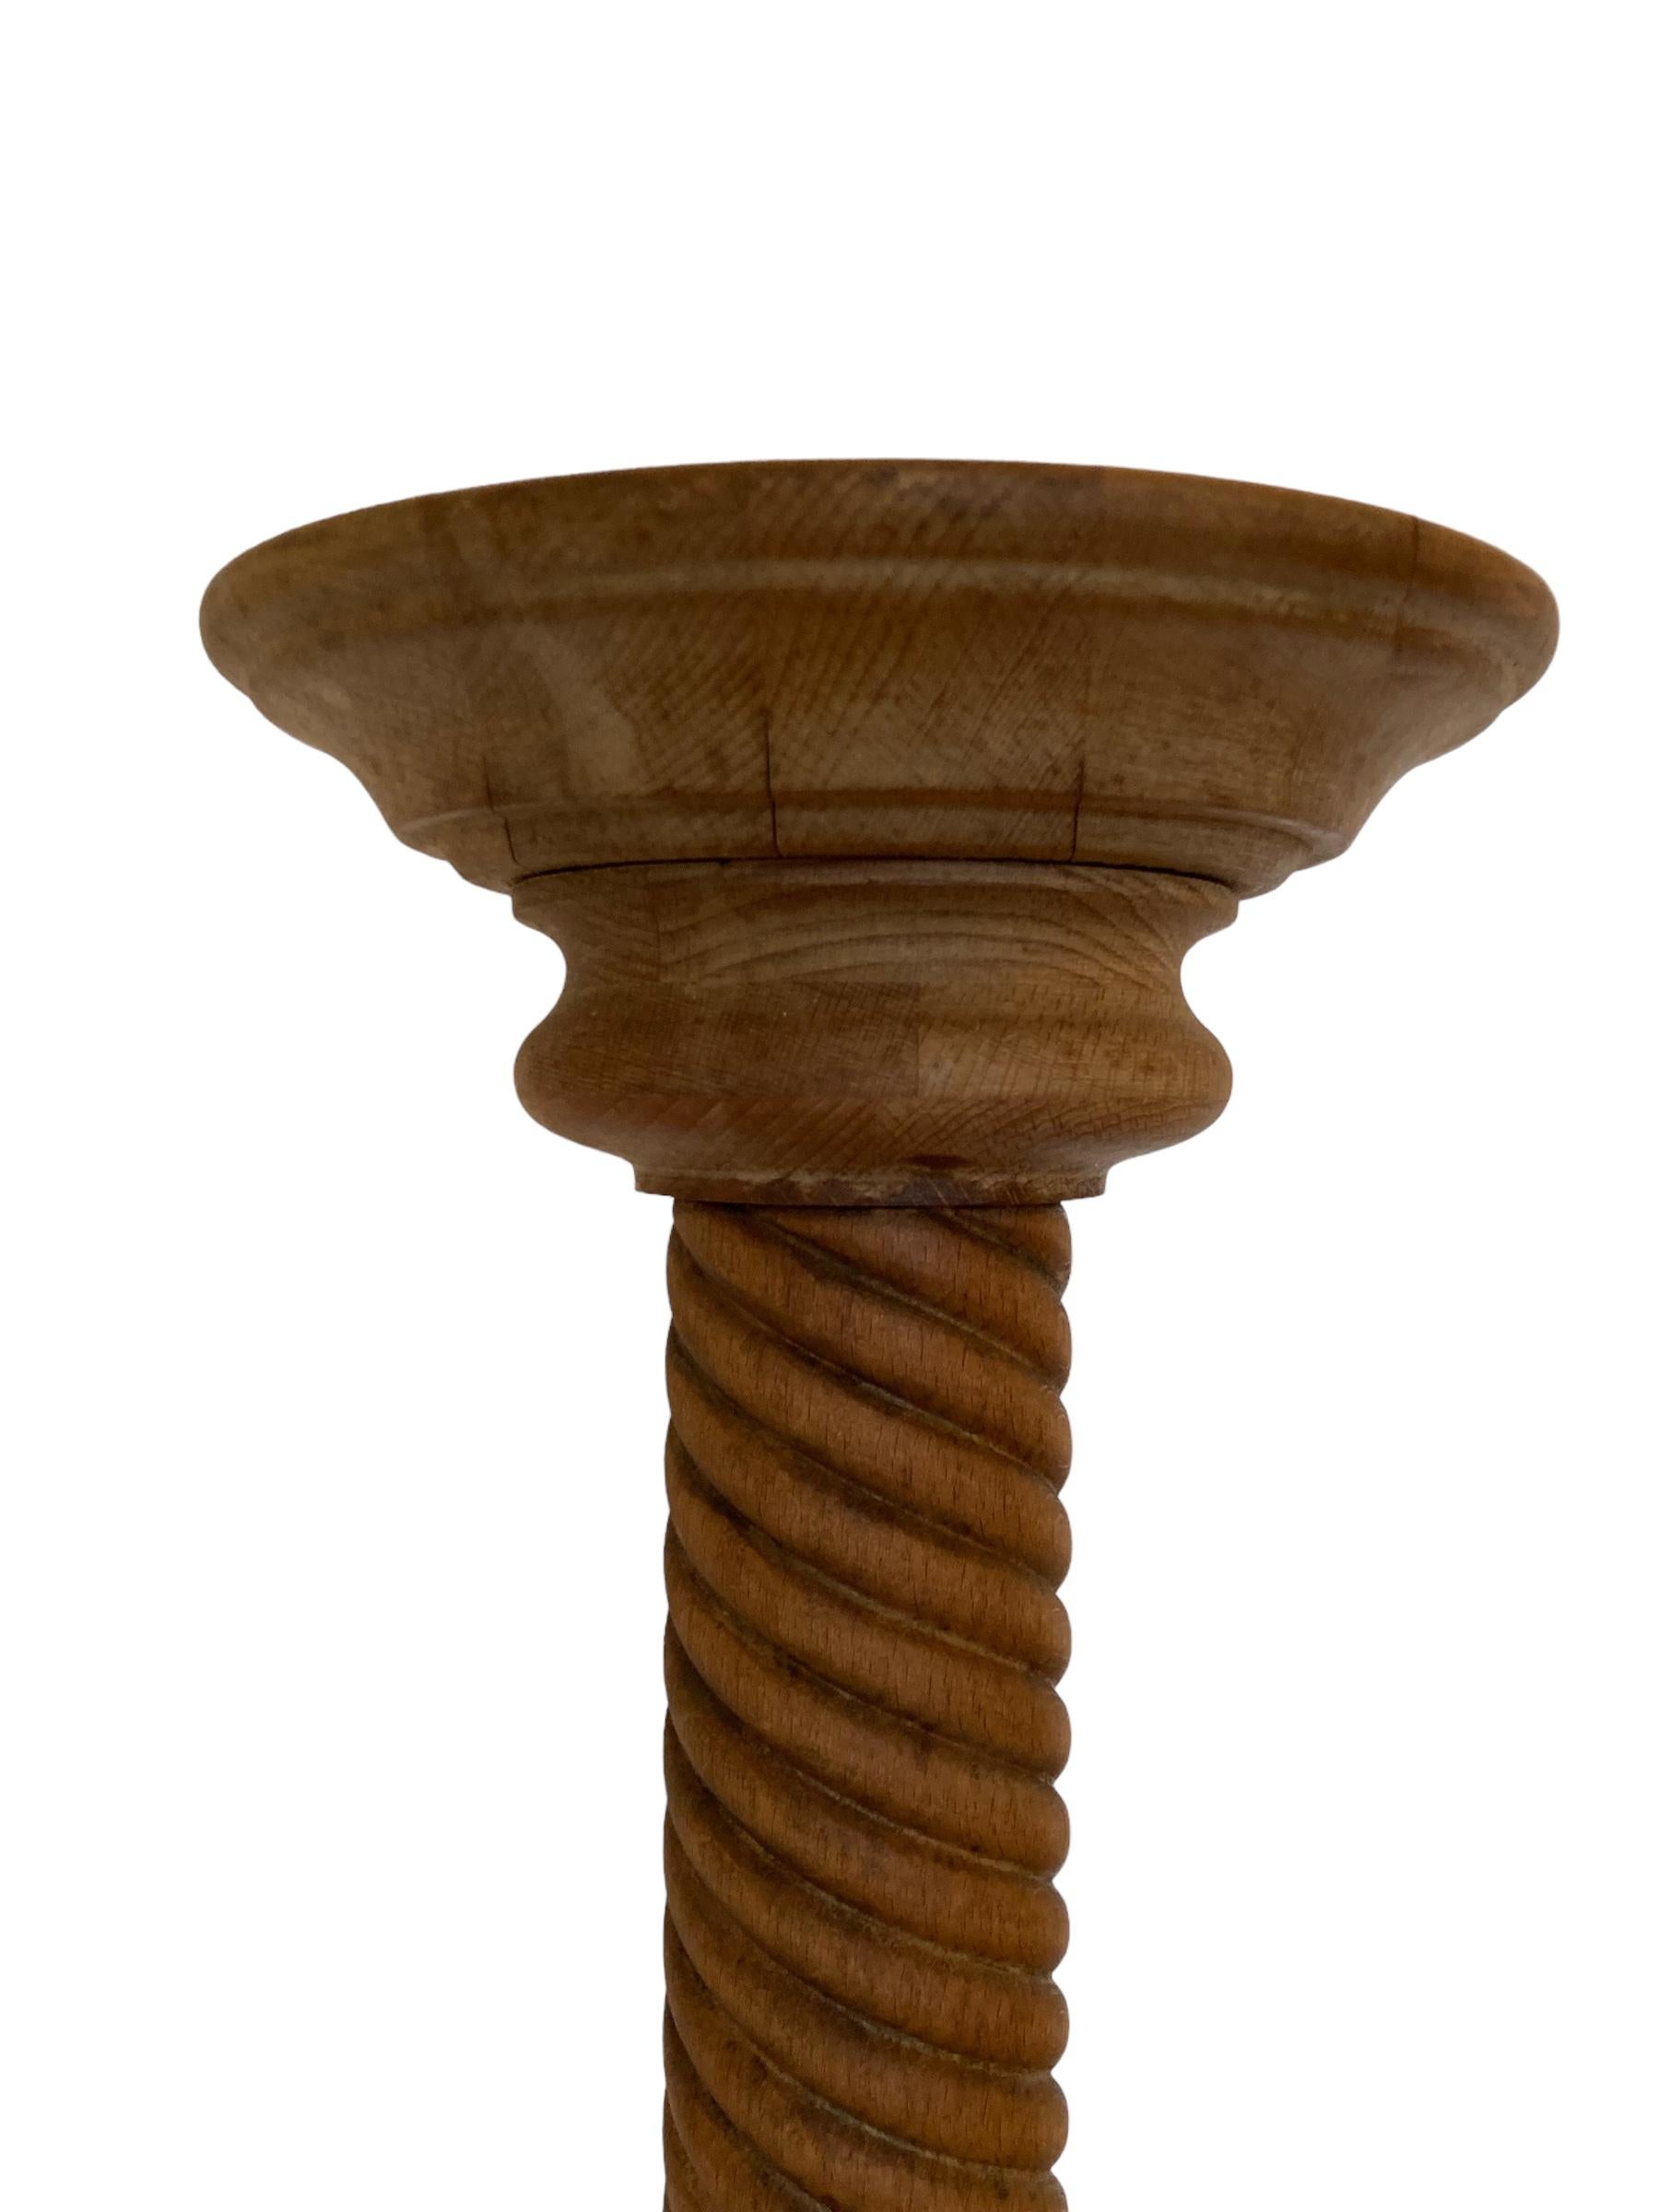 19th Century Carved Light Oak Pedestal Torchere with a captivating barley twist  3